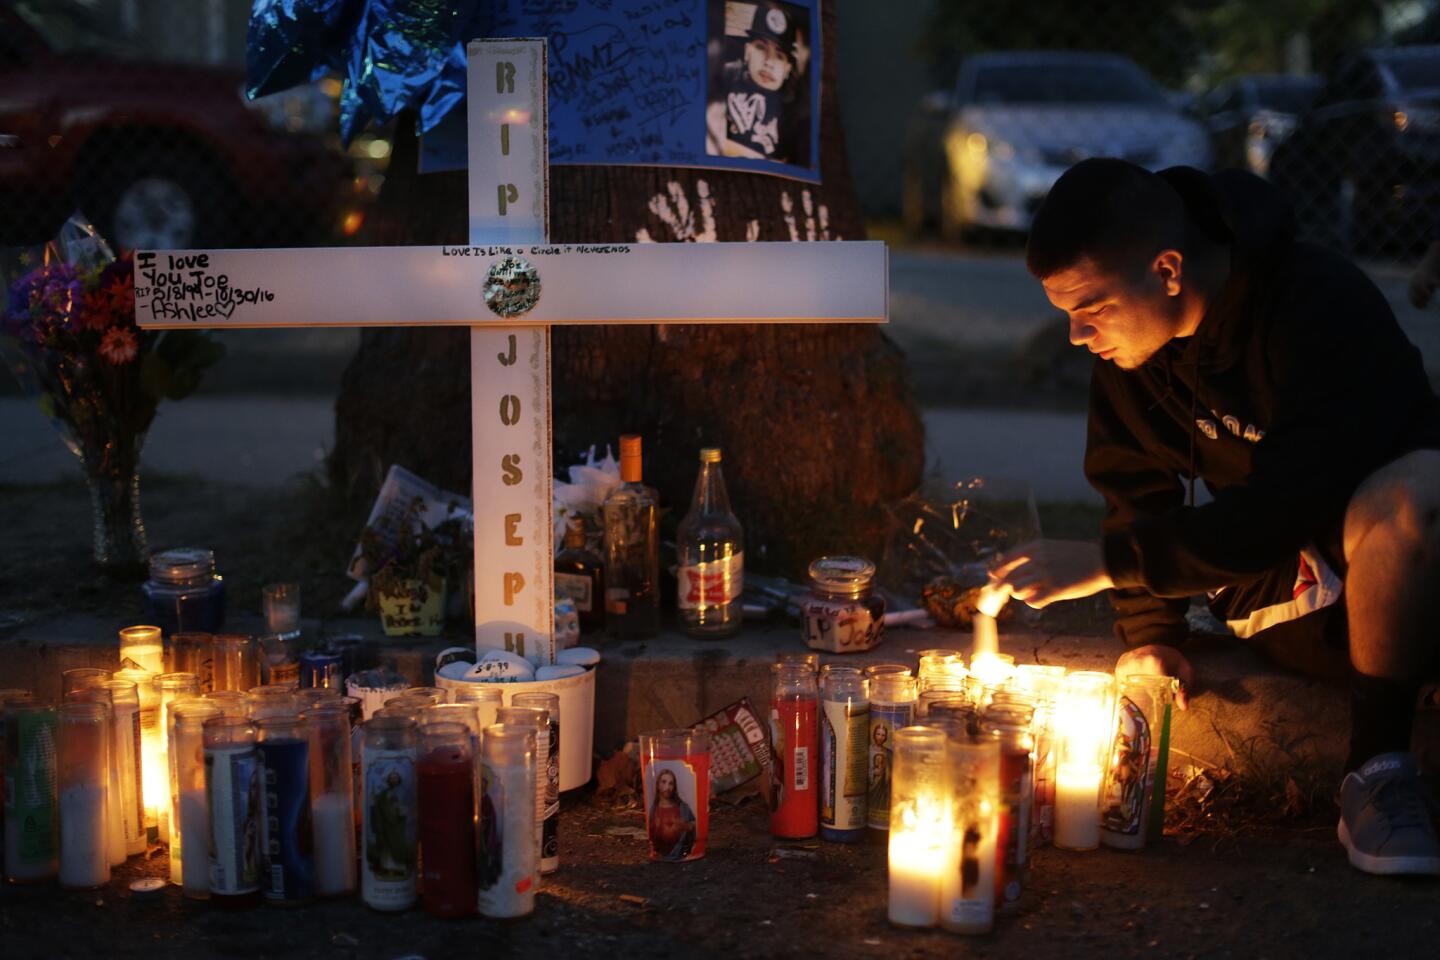 Kyle Rodriguez, 19, lights a candle at a makeshift memorial for his brother Joseph Rodriguez, whose homicide is among 60 murders so far this year in San Bernardino.